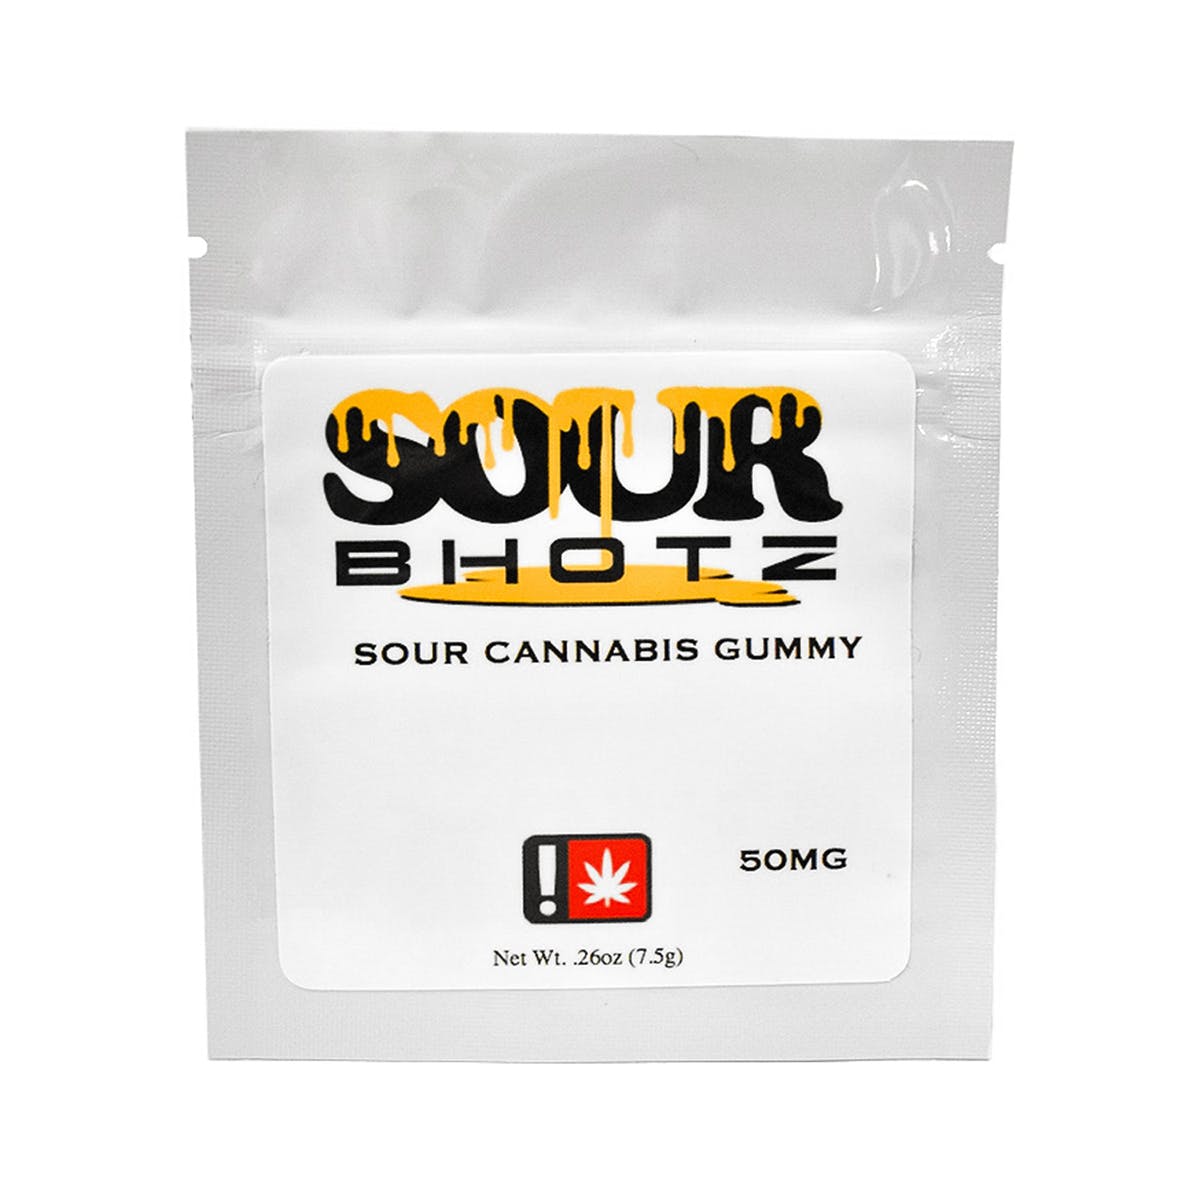 Sour Bhotz 50mg